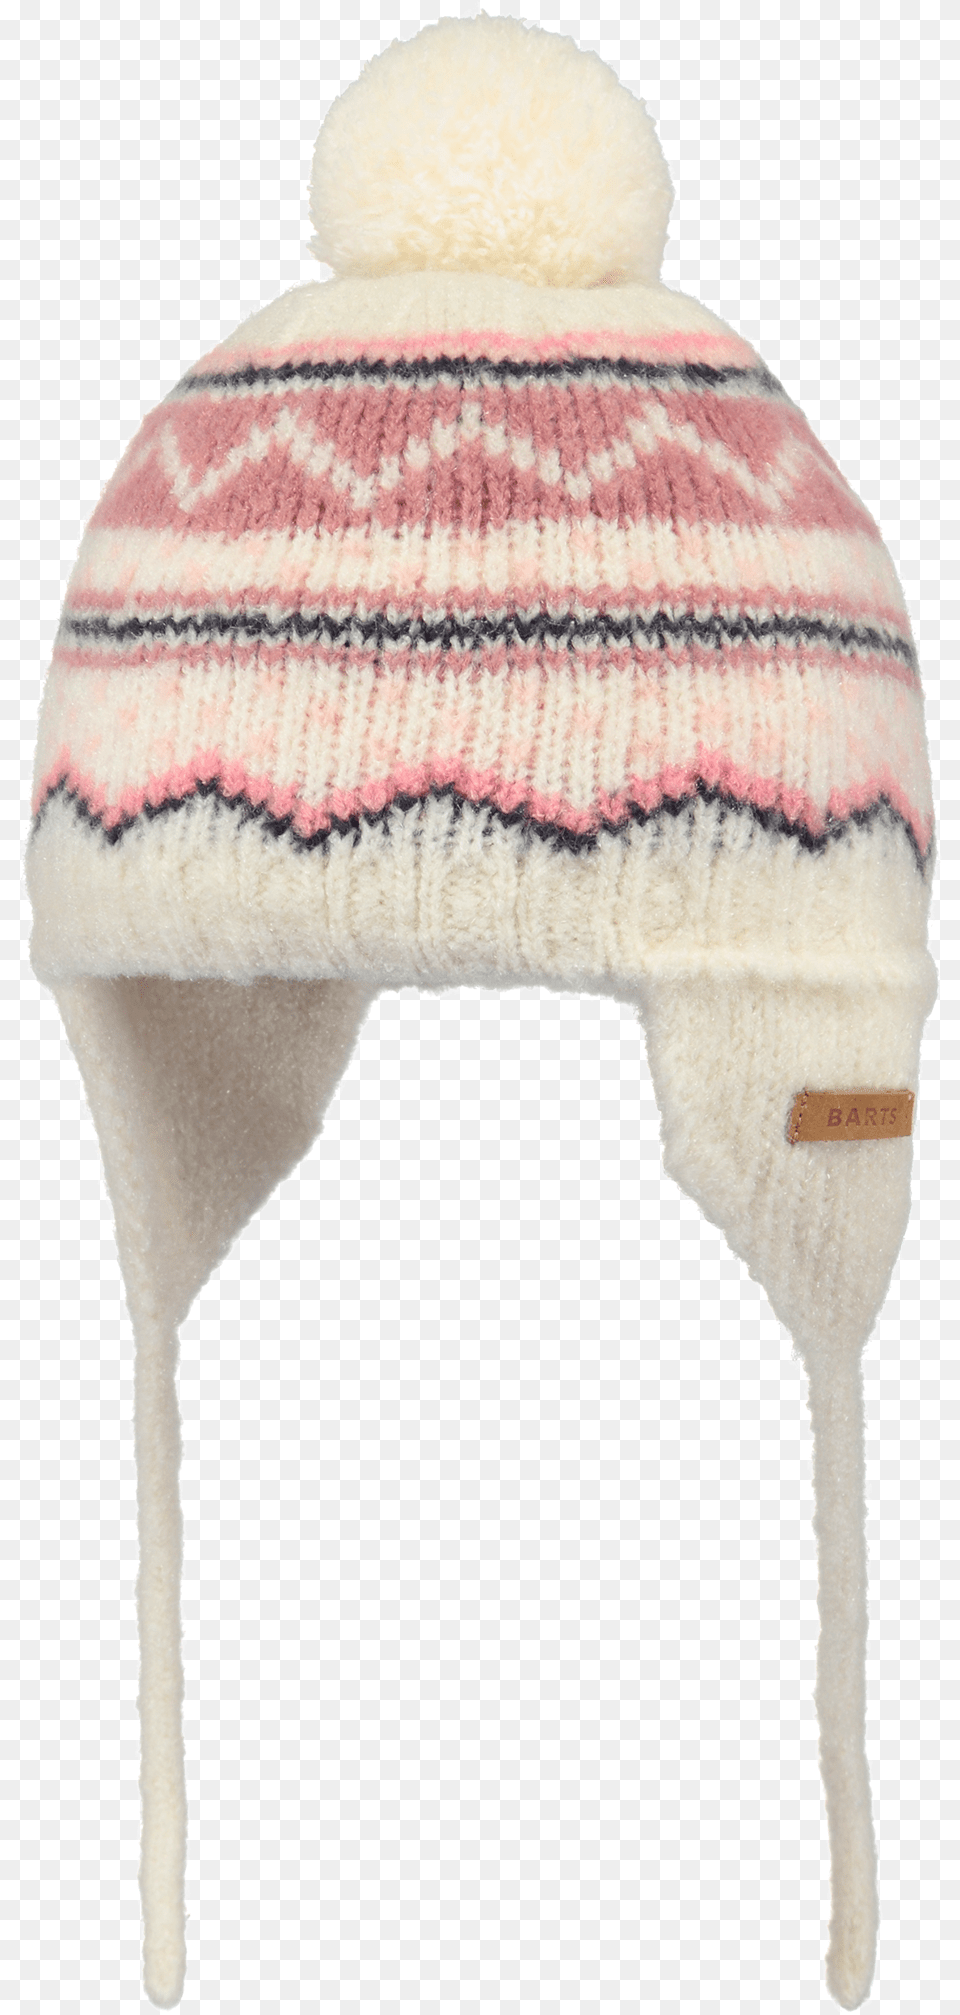 Barts Thumper Beanie Beanie, Cap, Clothing, Hat, Adult Png